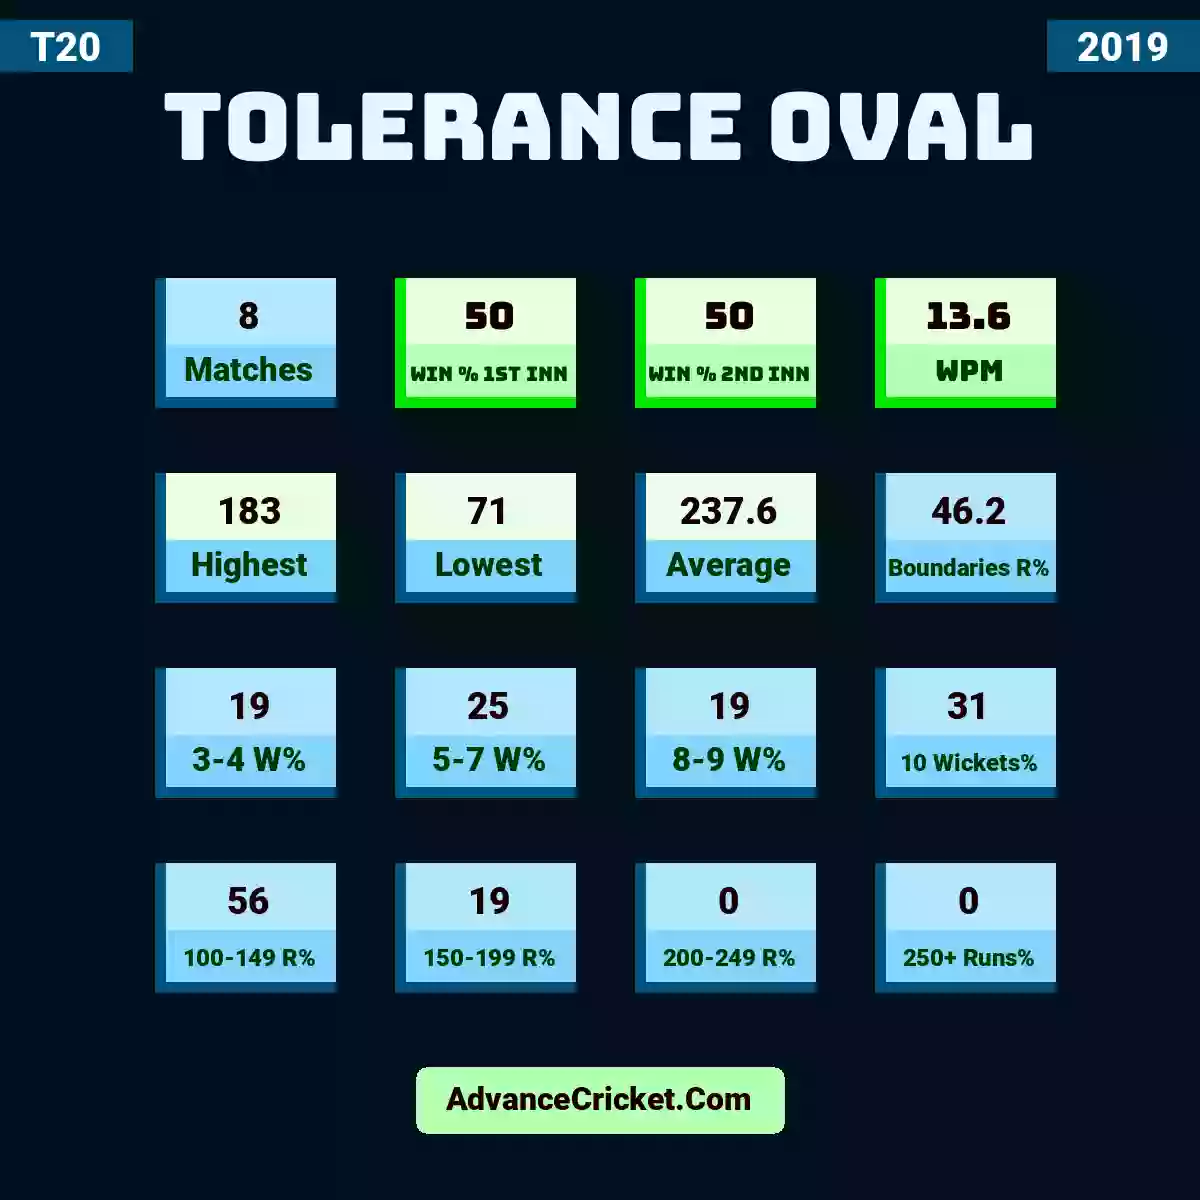 Image showing Tolerance Oval with Matches: 8, Win % 1st Inn: 50, Win % 2nd Inn: 50, WPM: 13.6, Highest: 183, Lowest: 71, Average: 237.6, Boundaries R%: 46.2, 3-4 W%: 19, 5-7 W%: 25, 8-9 W%: 19, 10 Wickets%: 31, 100-149 R%: 56, 150-199 R%: 19, 200-249 R%: 0, 250+ Runs%: 0.